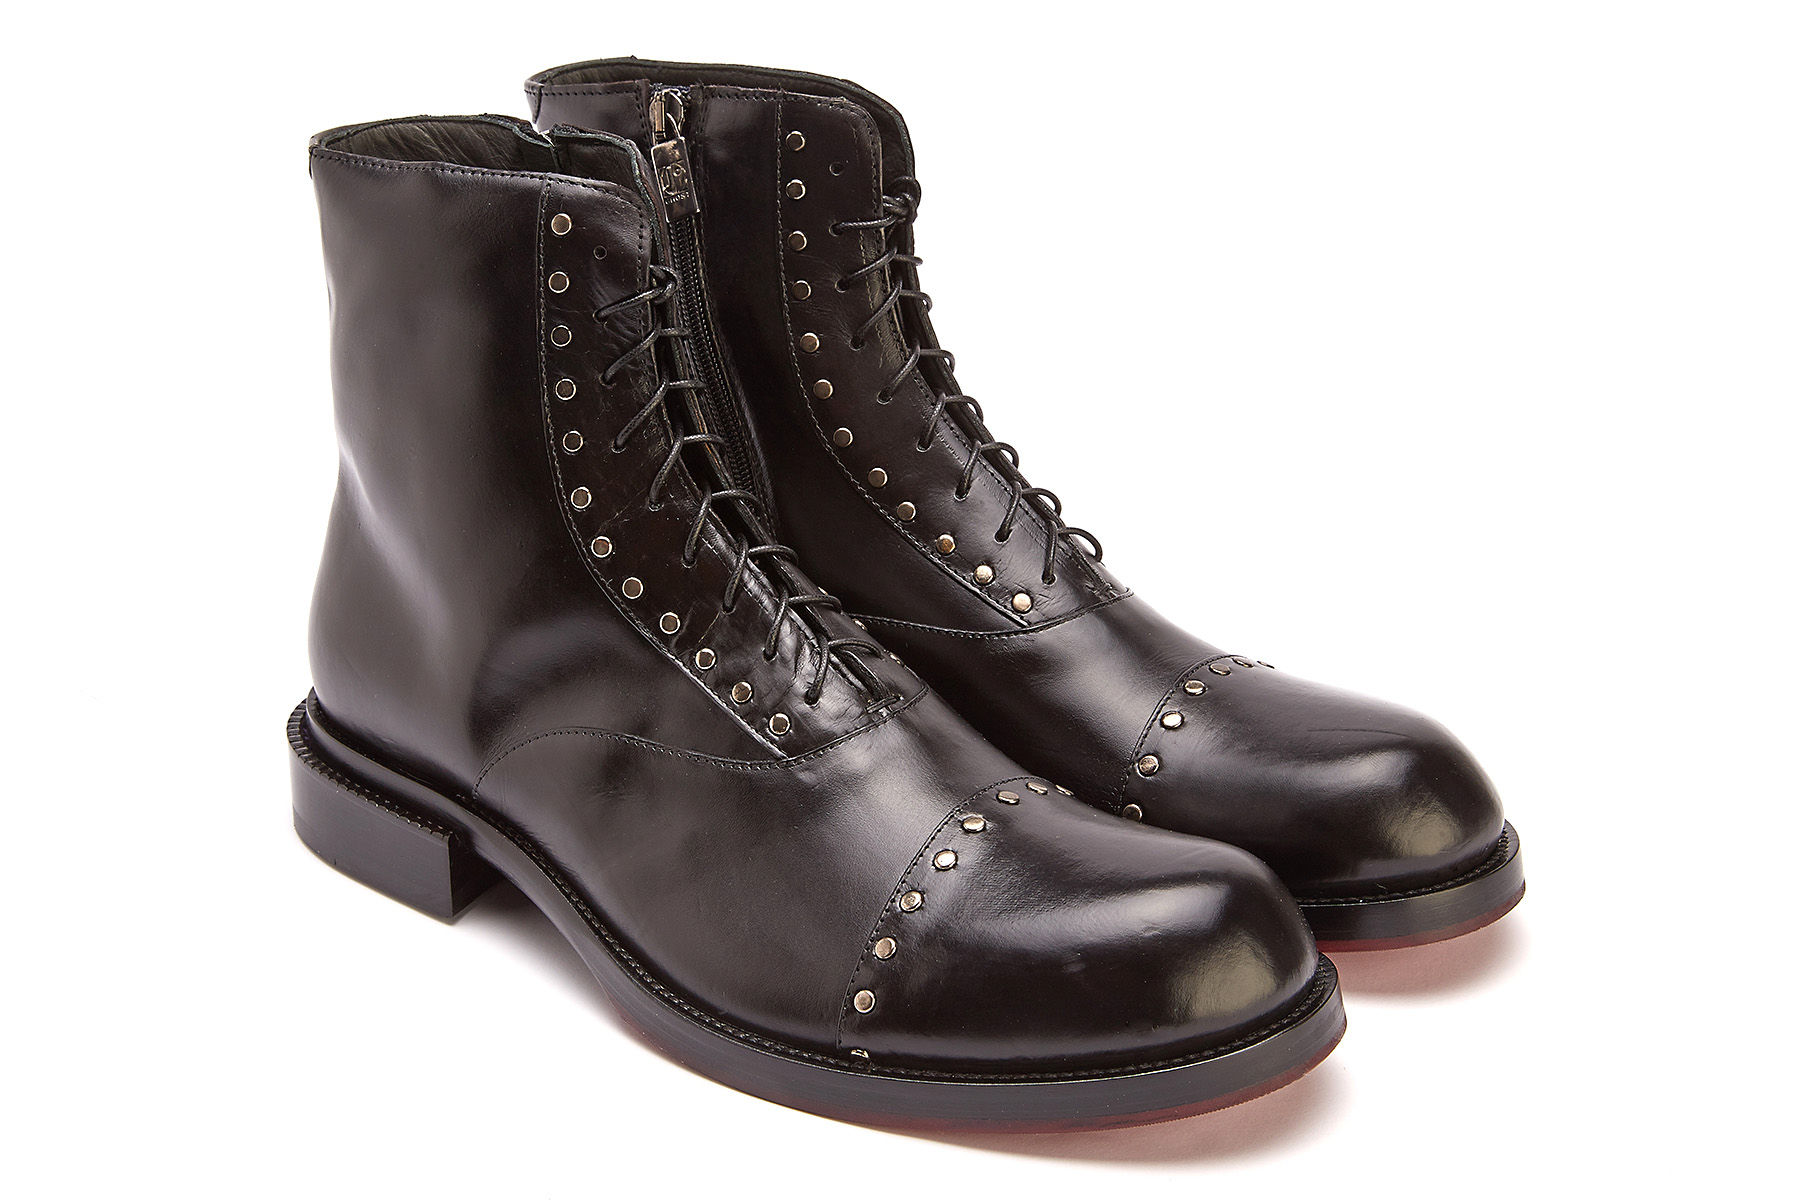 Men's Lace Up Ankle Boots JO GHOST 1990 Nero | Apia